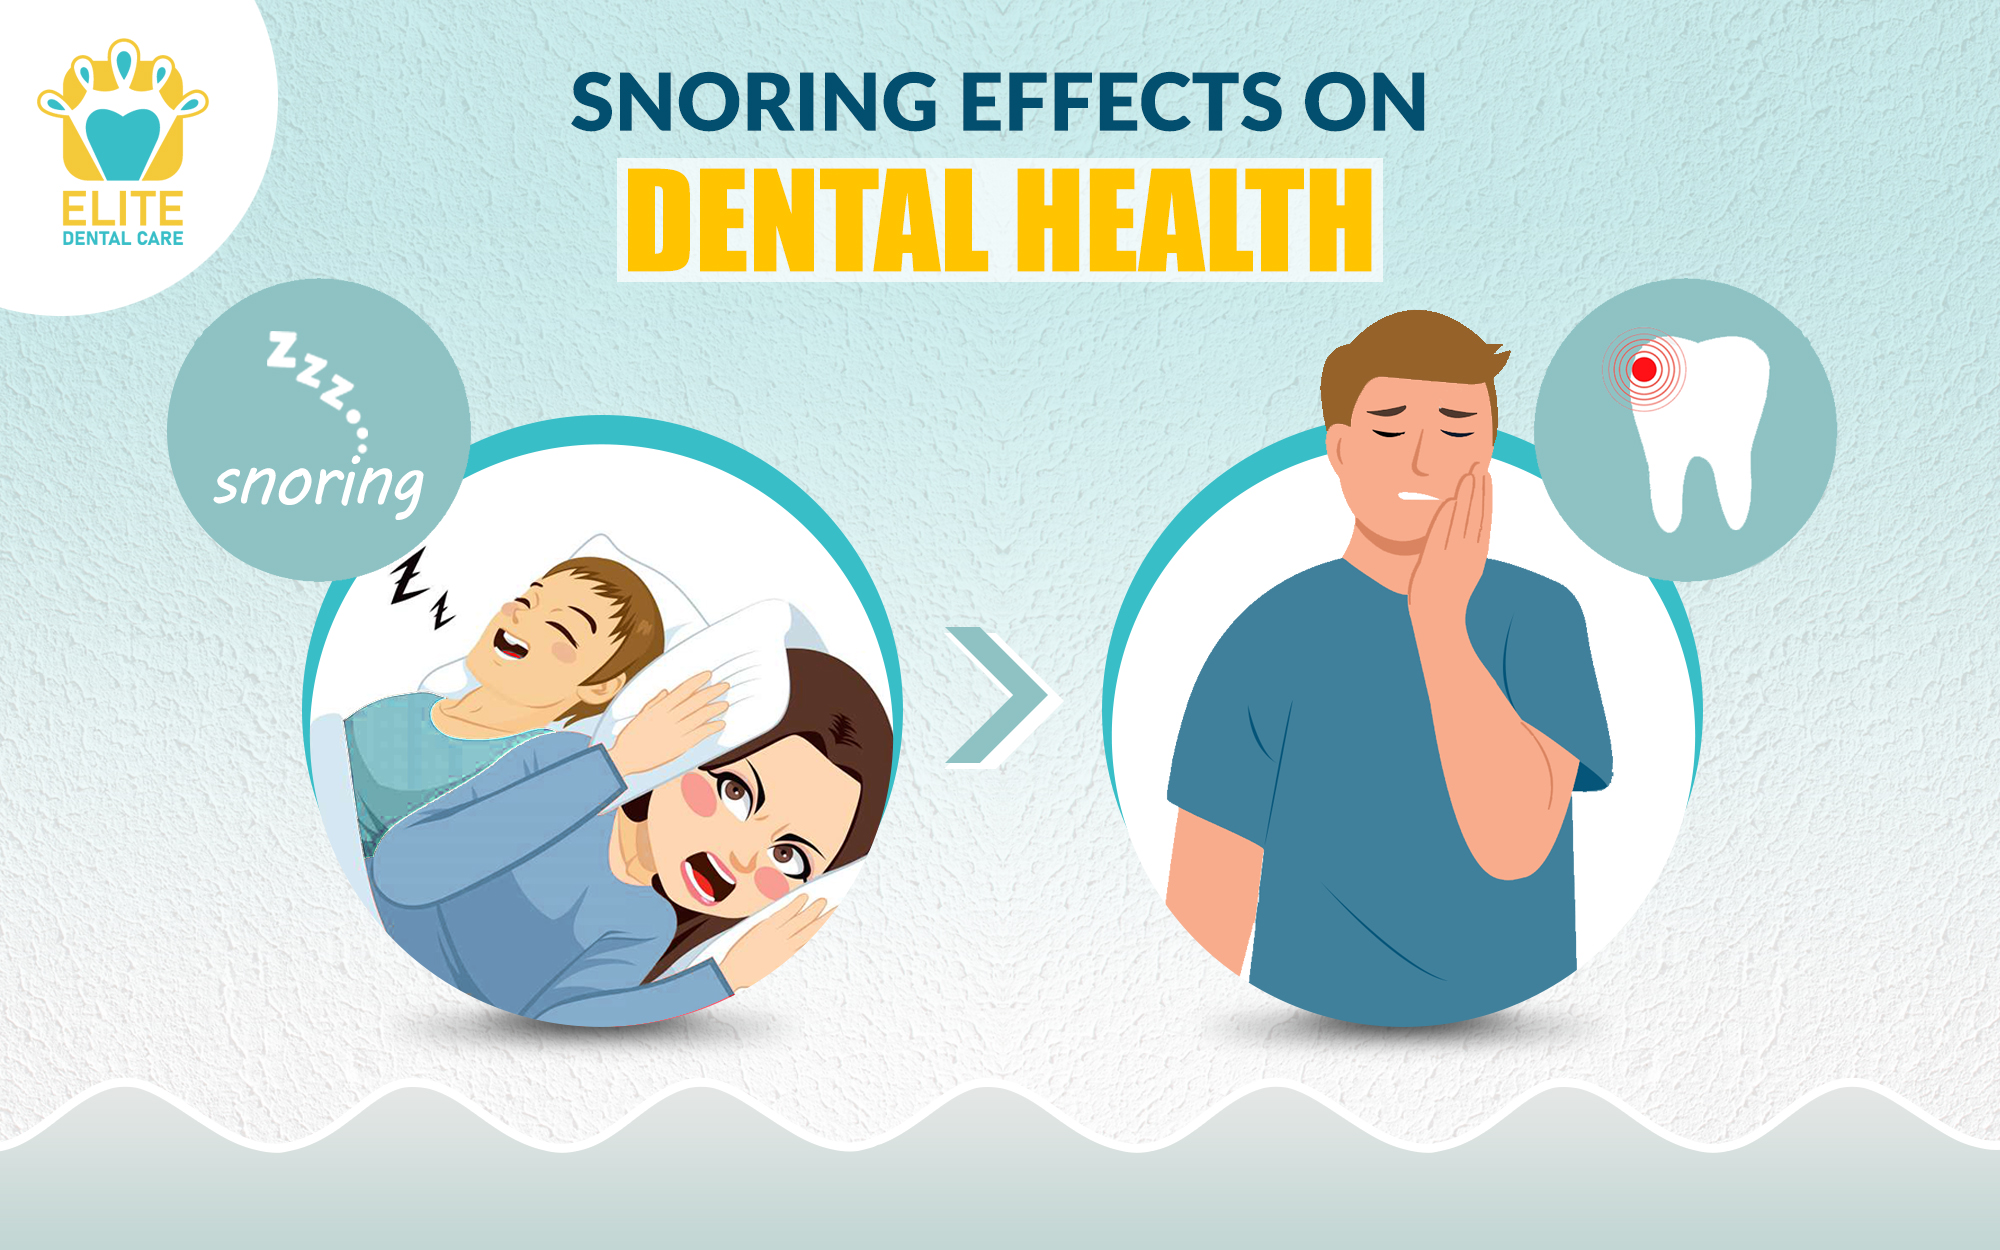 How does Snoring Affect Dental Health?